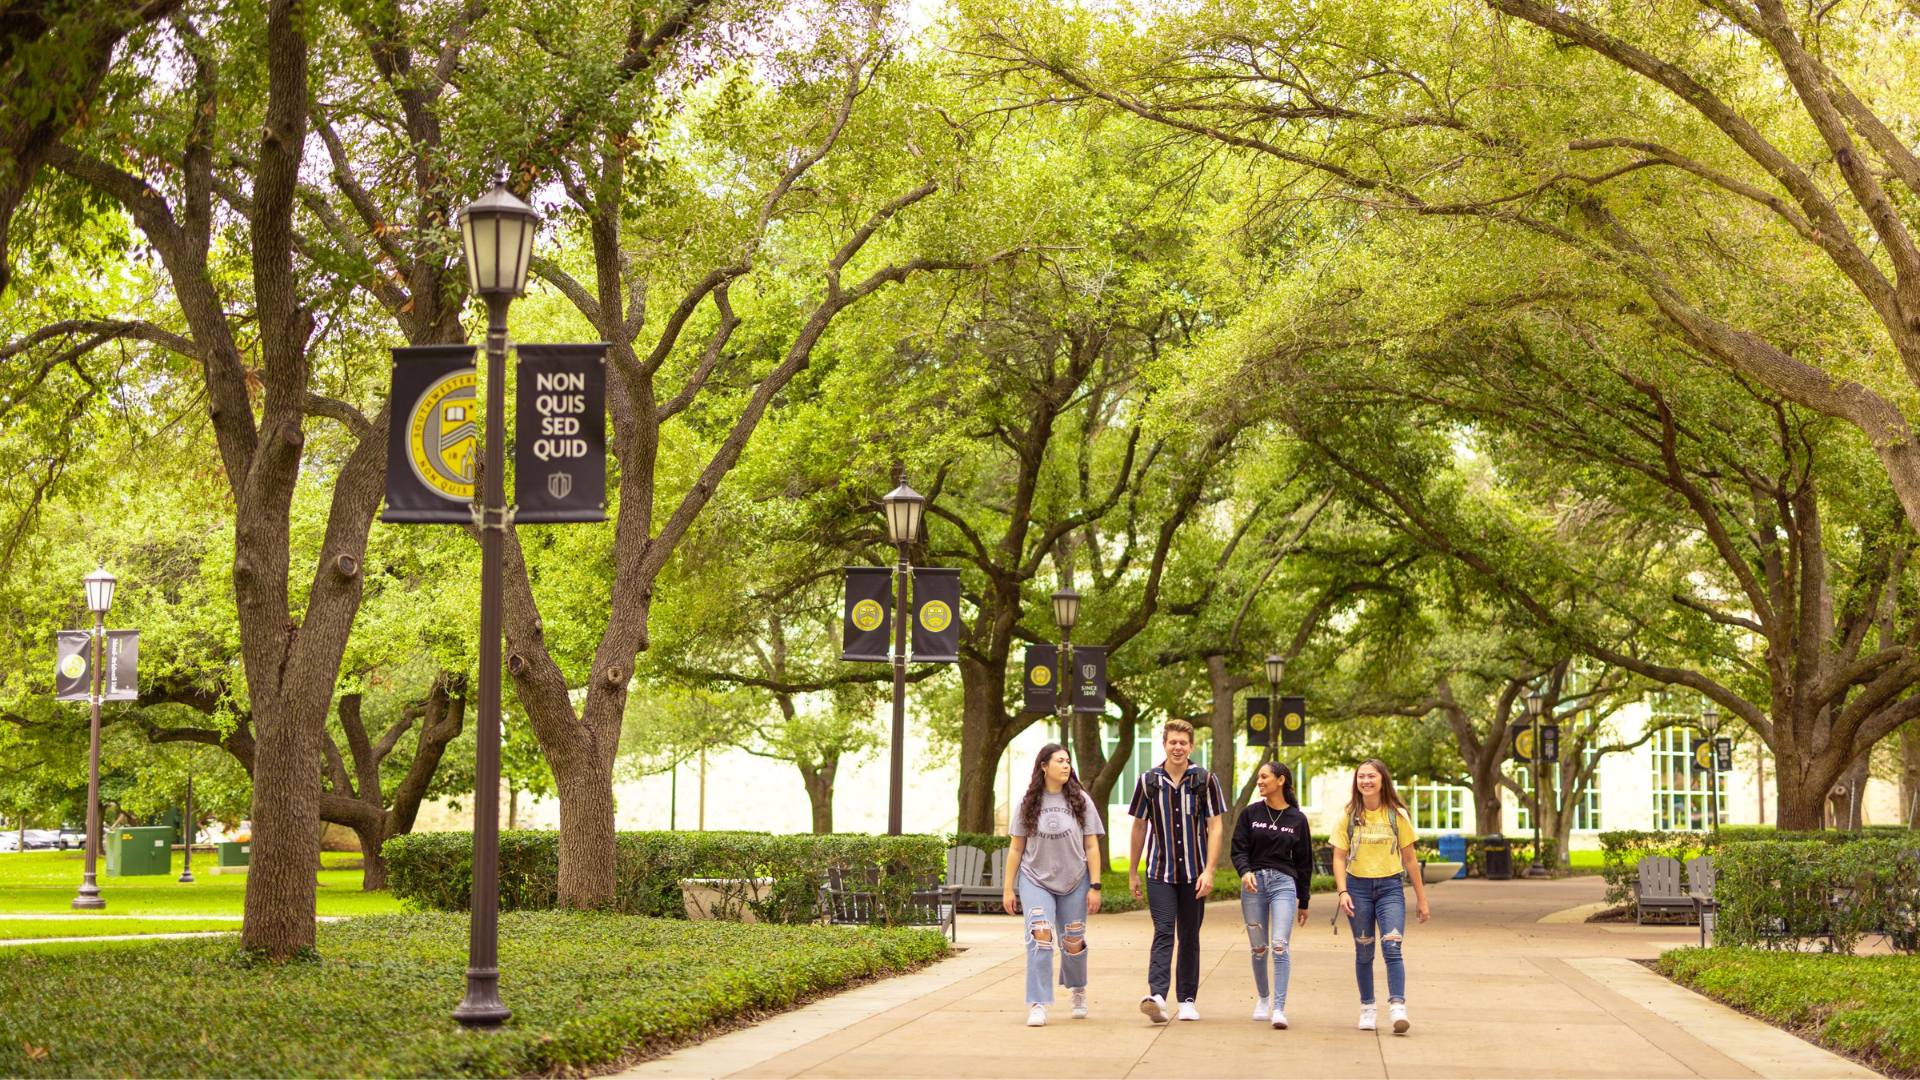 Four college students walk through a college campus under a canopy of trees.